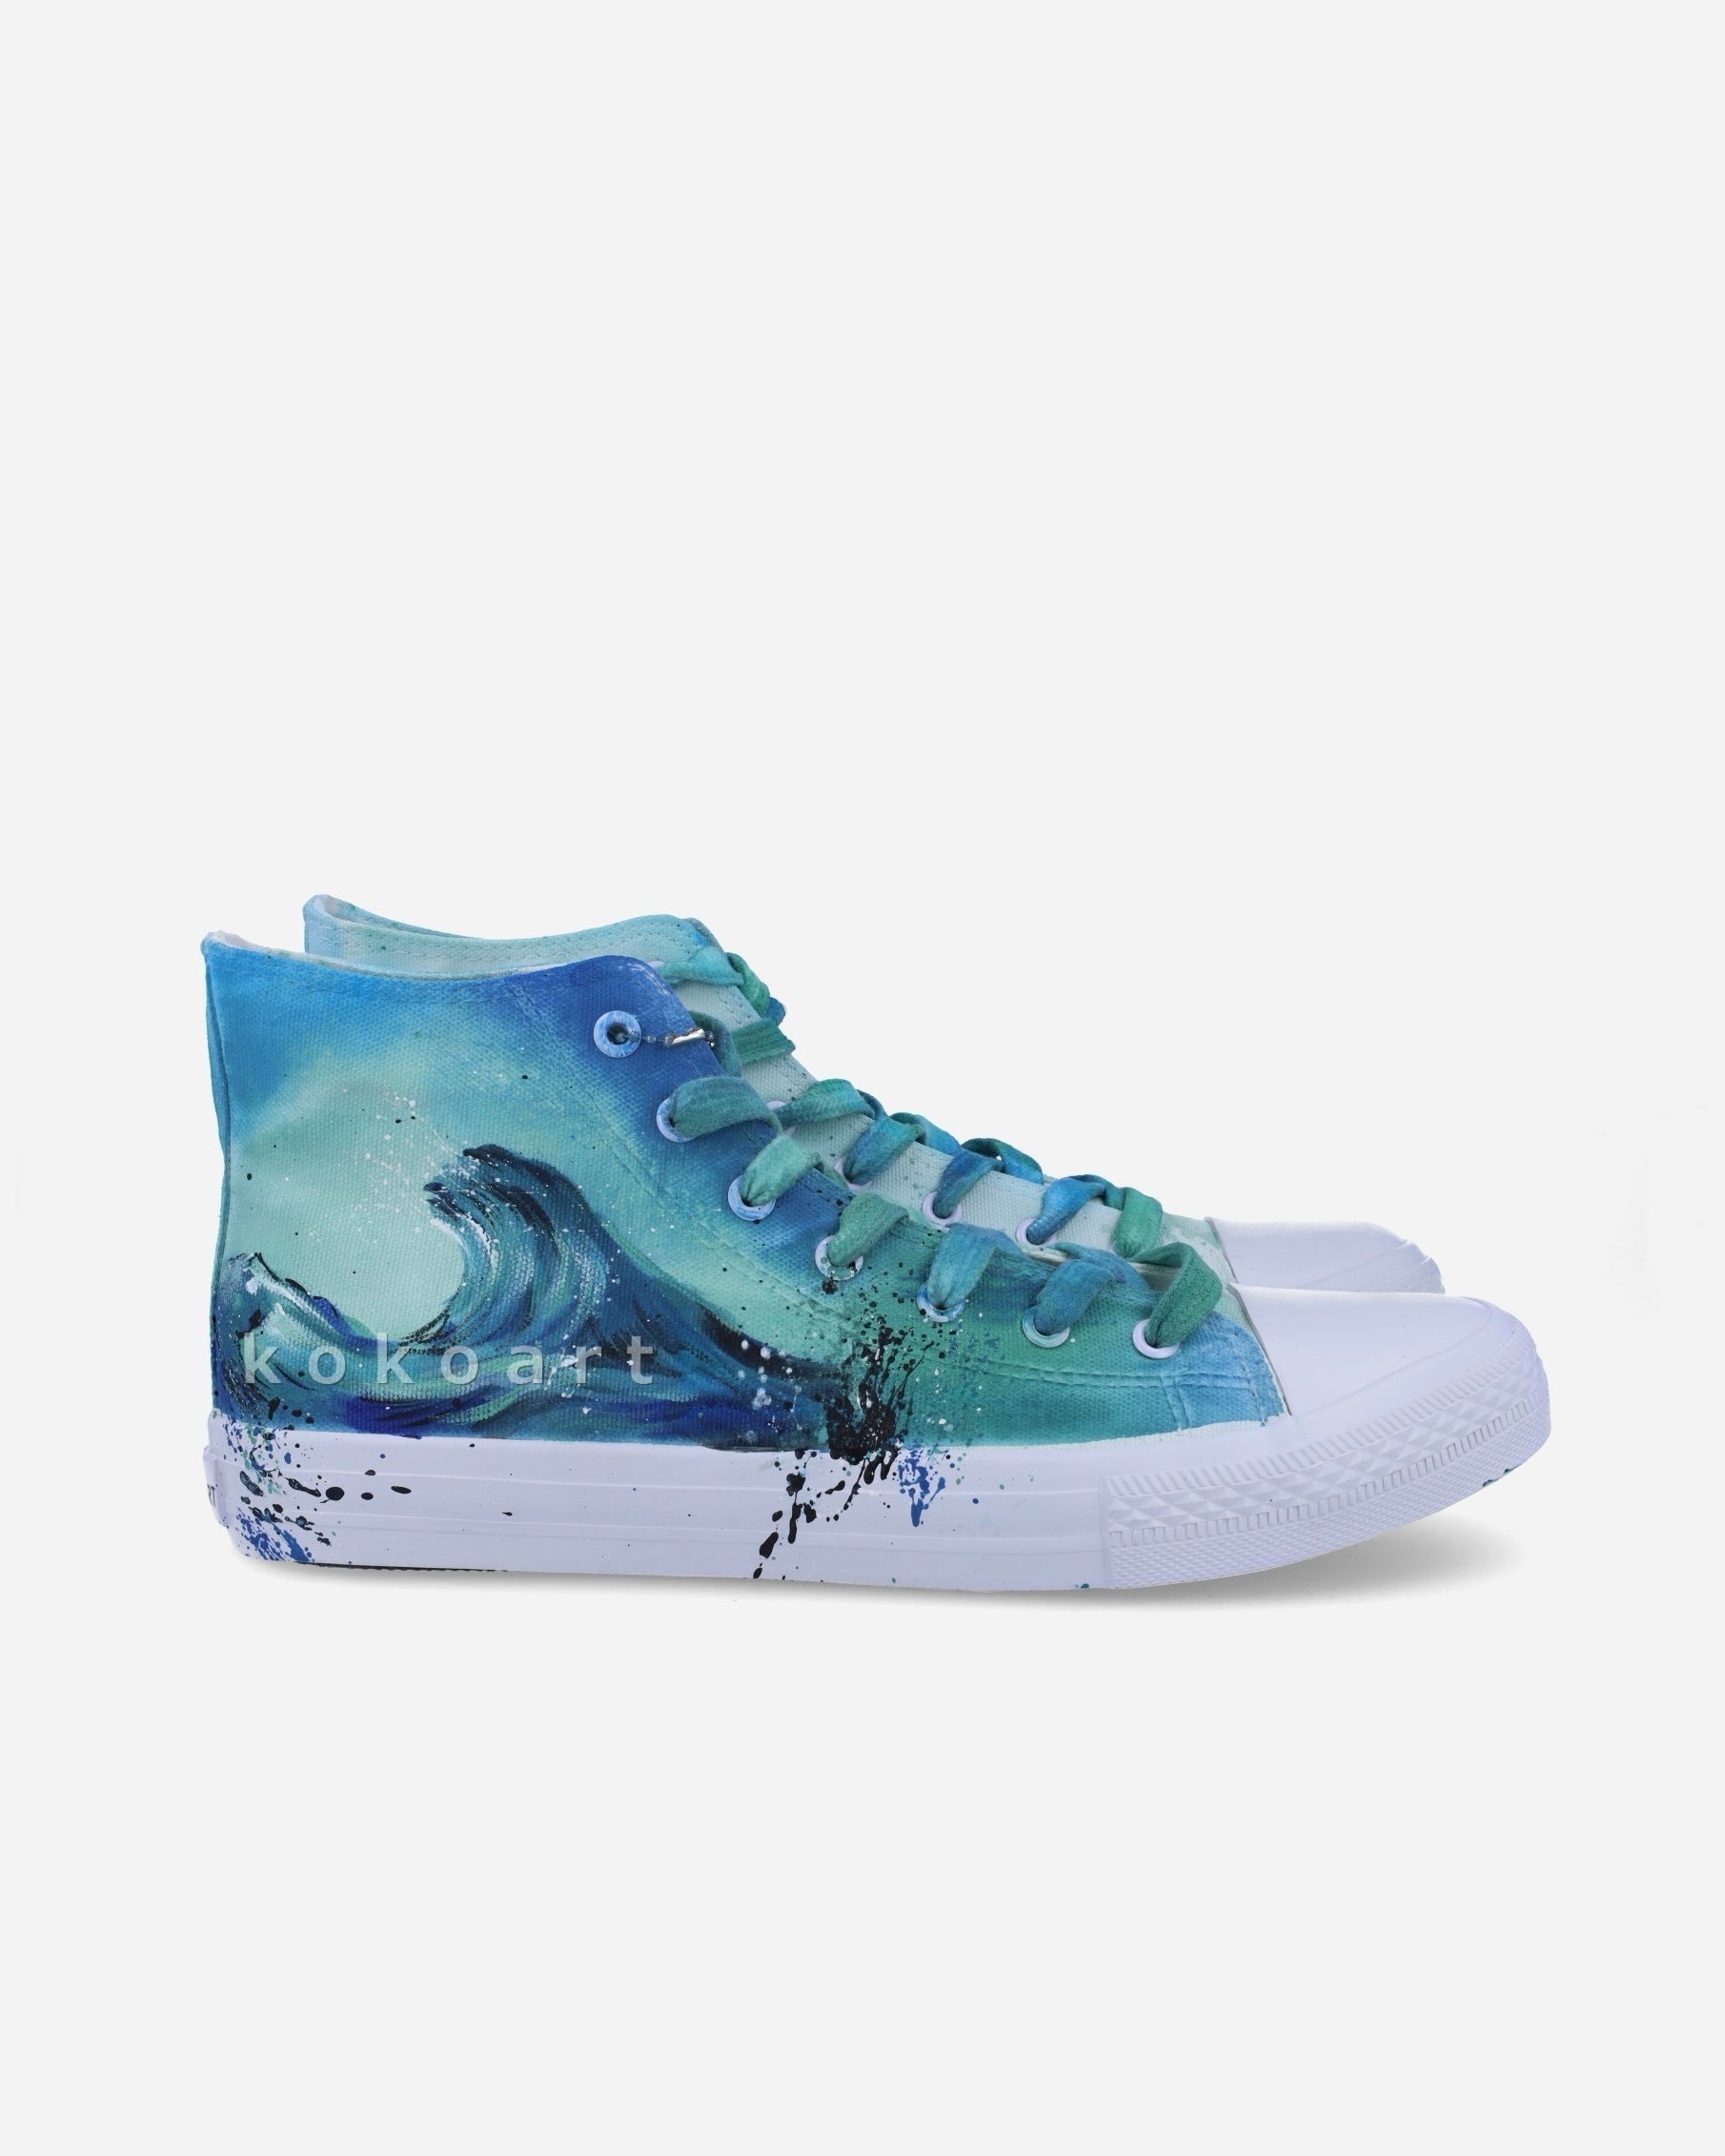 Waves Hand Painted Shoes